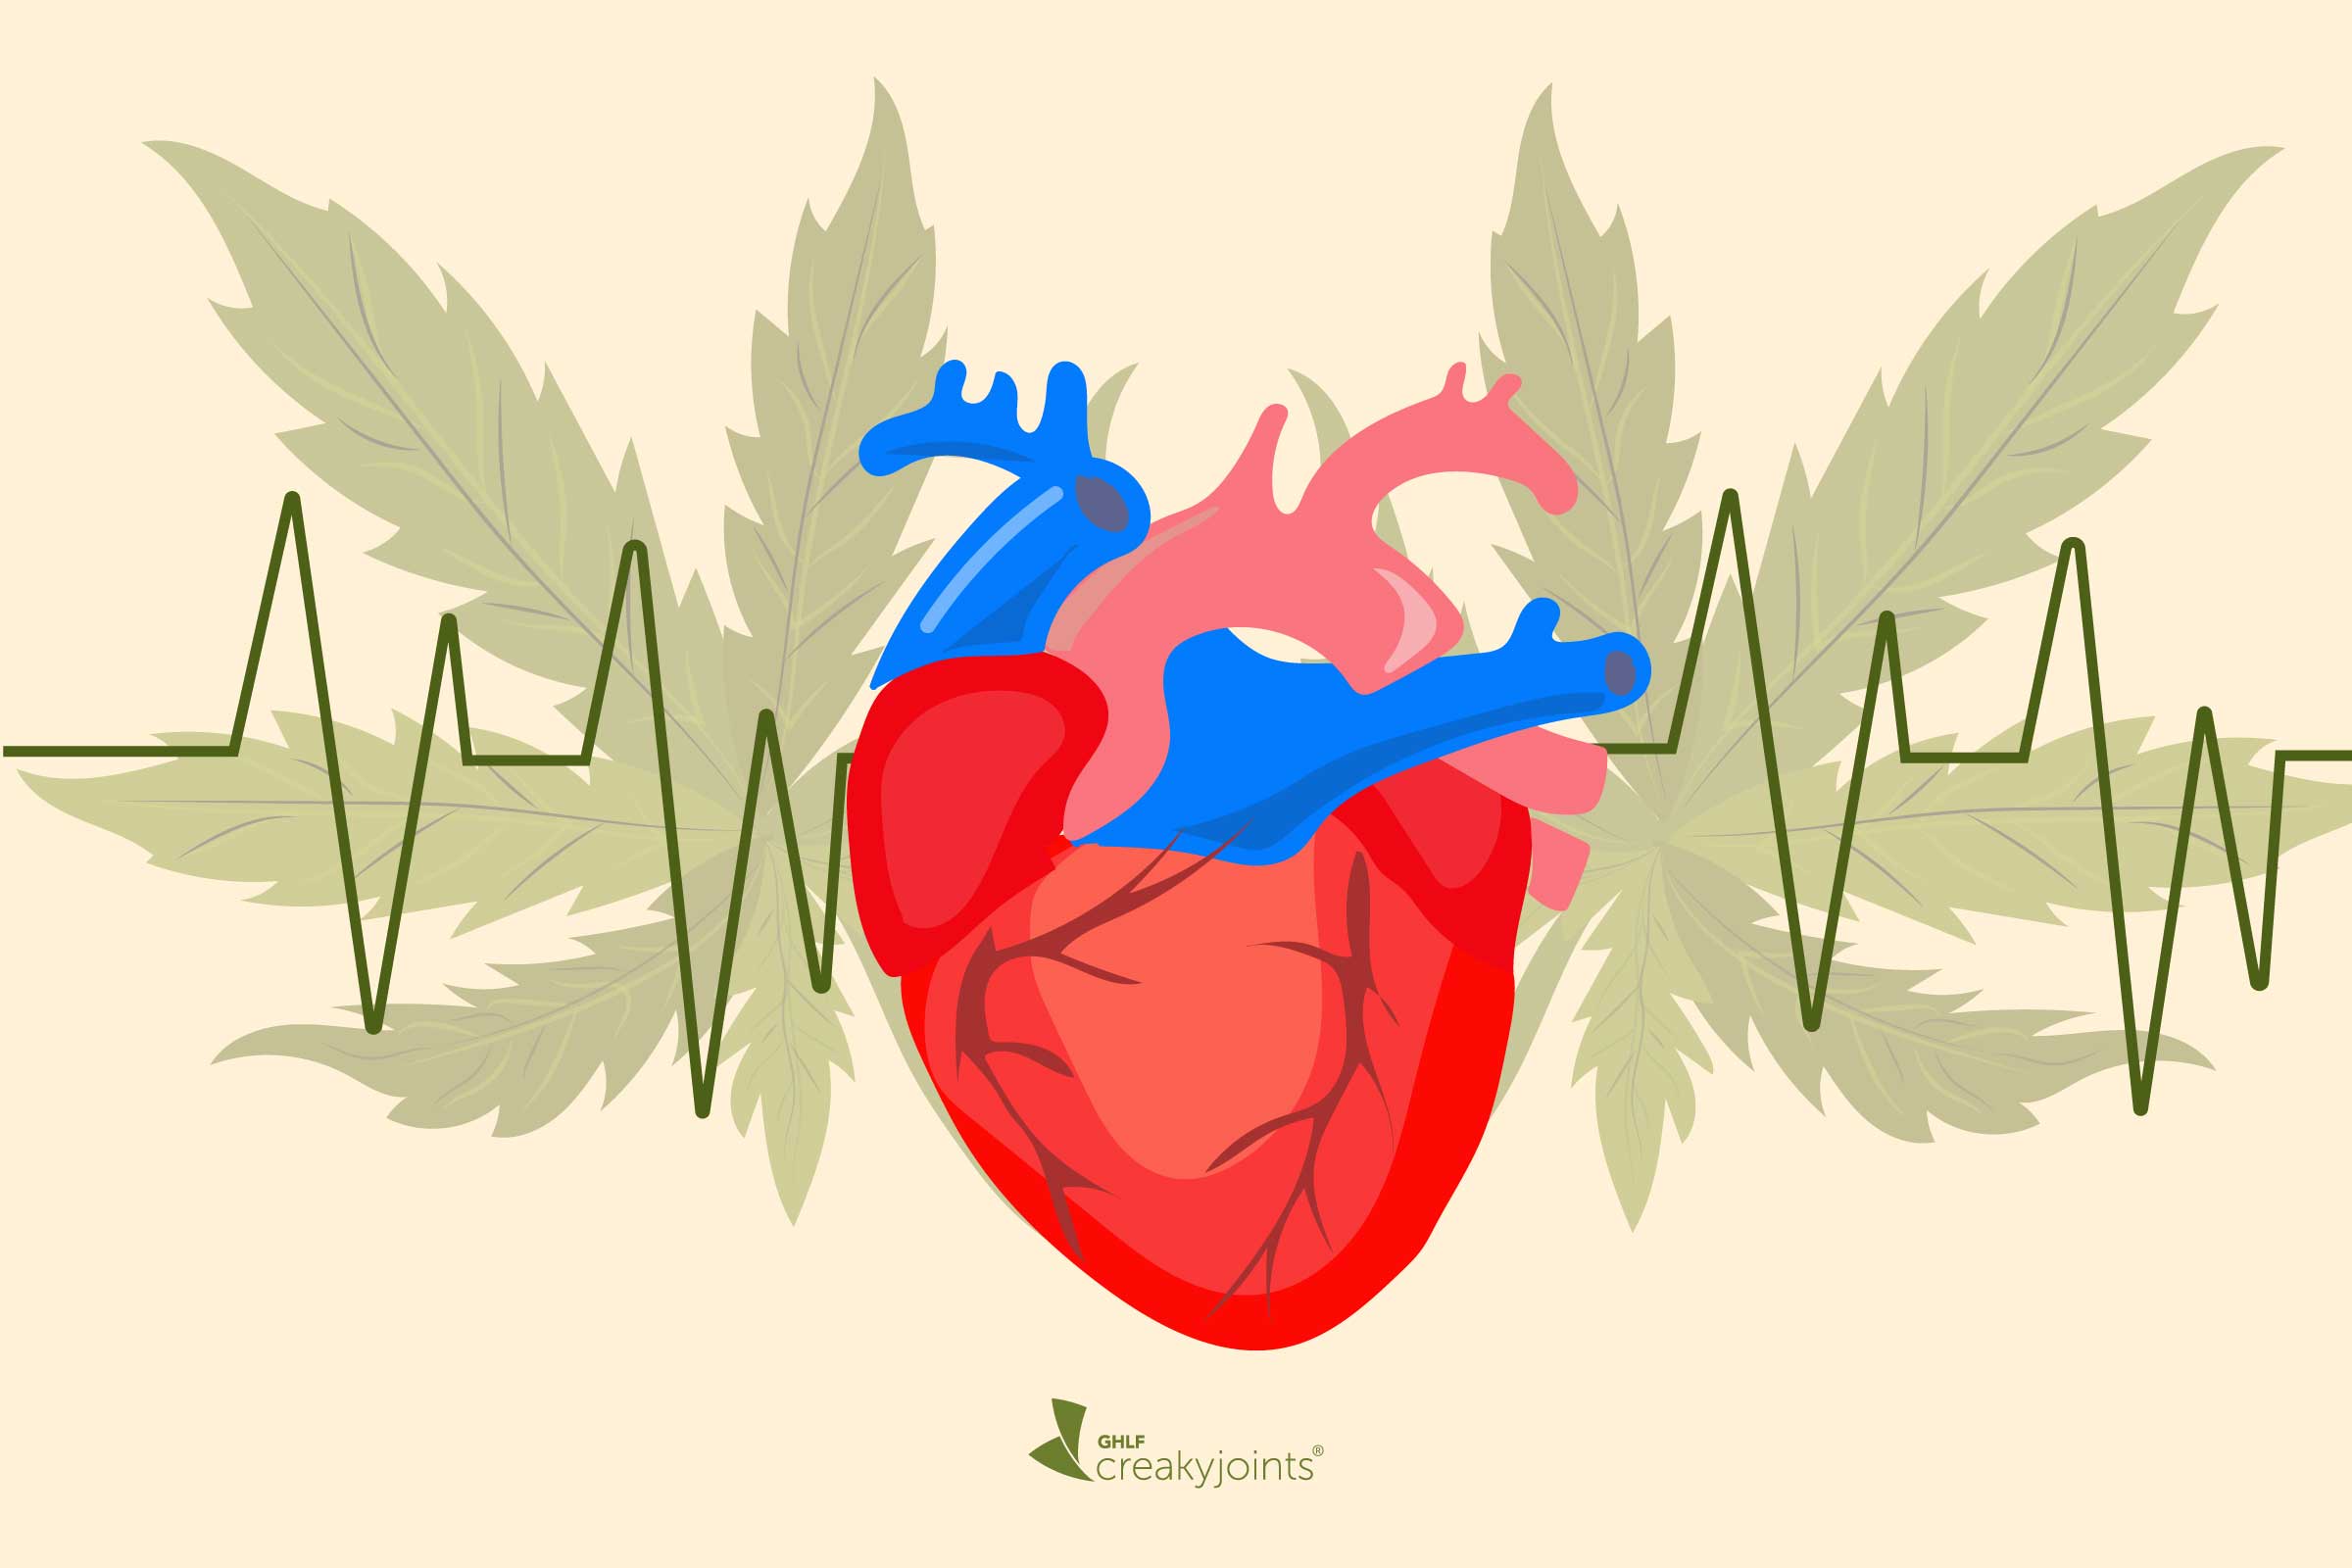 New Studies Show Increased Of Heart Disease If You Consume Cannabis